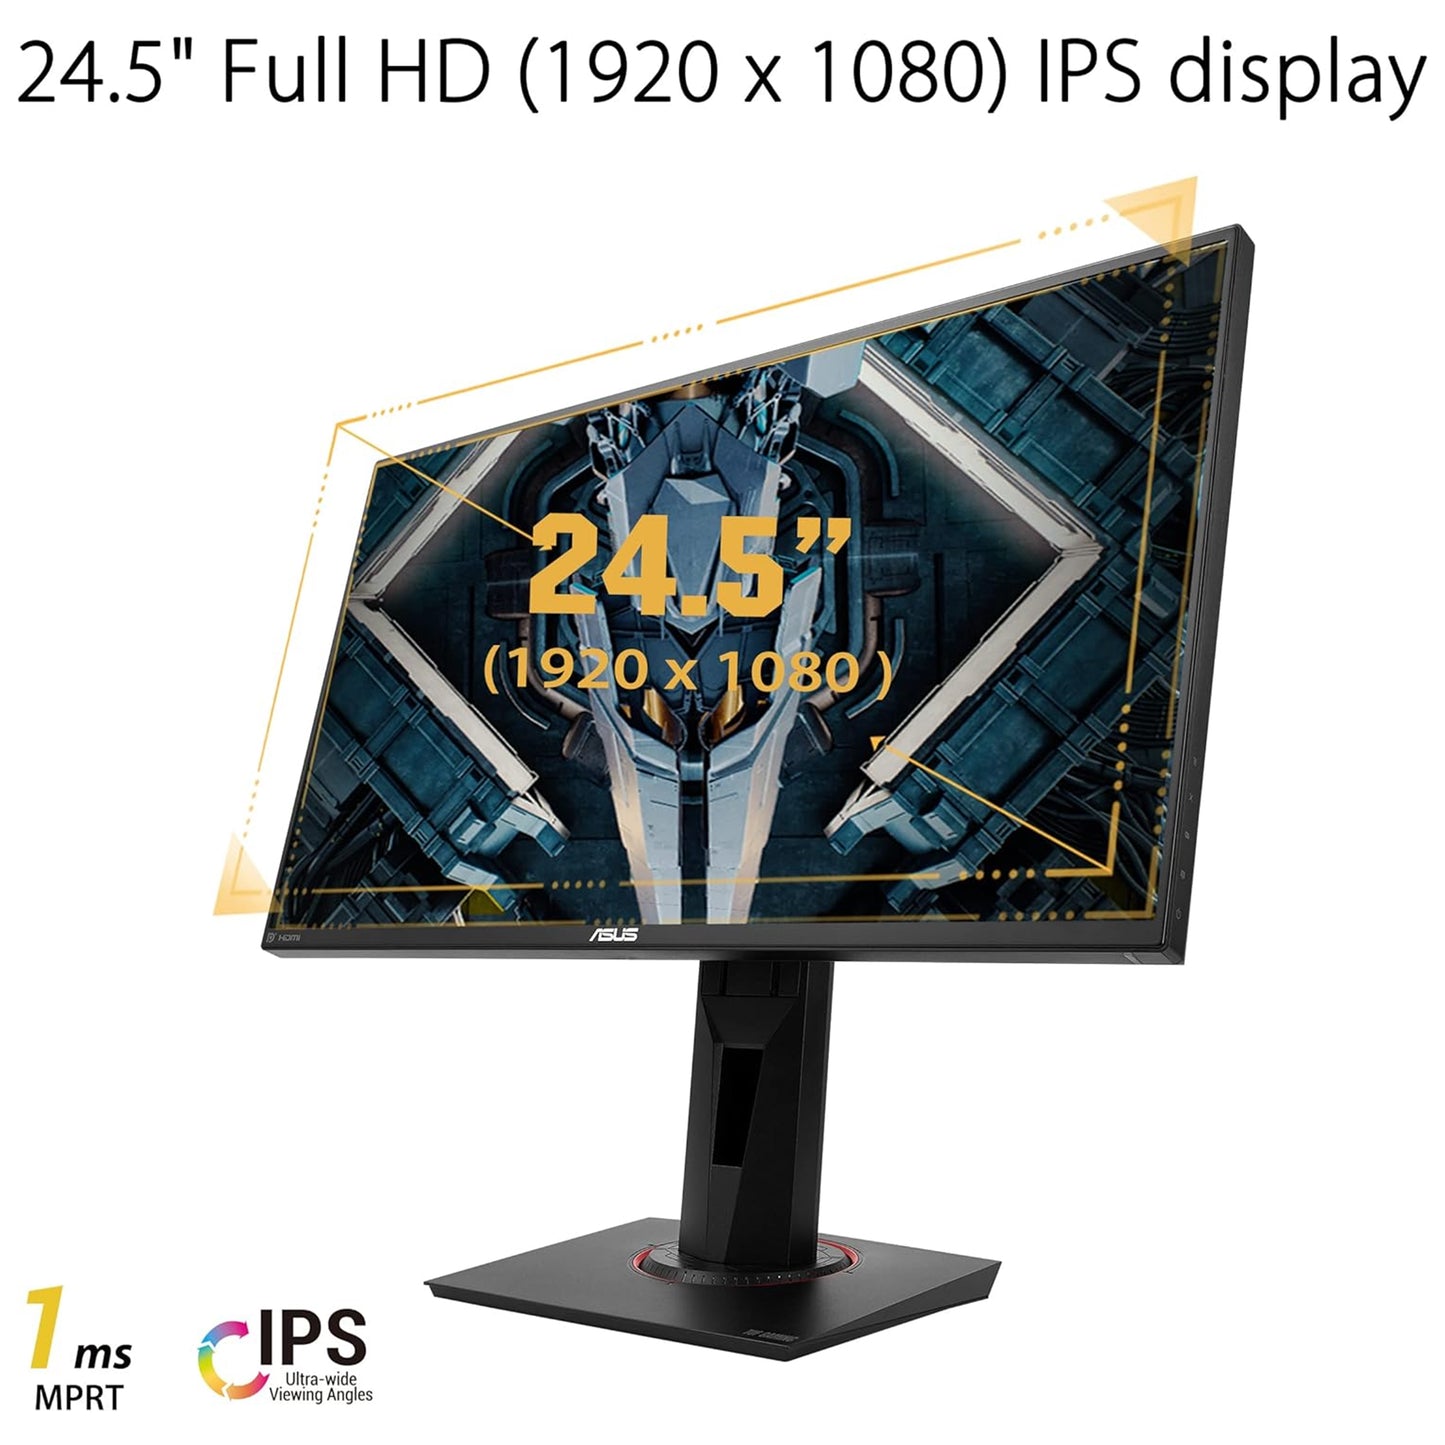 ASUS TUF Gaming VG259QR 24.5” Gaming Monitor, 1080P Full HD, 165Hz (Supports 144Hz), 1ms, Extreme Low Motion Blur, G-SYNC ready, Eye Care, DisplayPort HDMI, Shadow Boost, Height Adjustable,Black